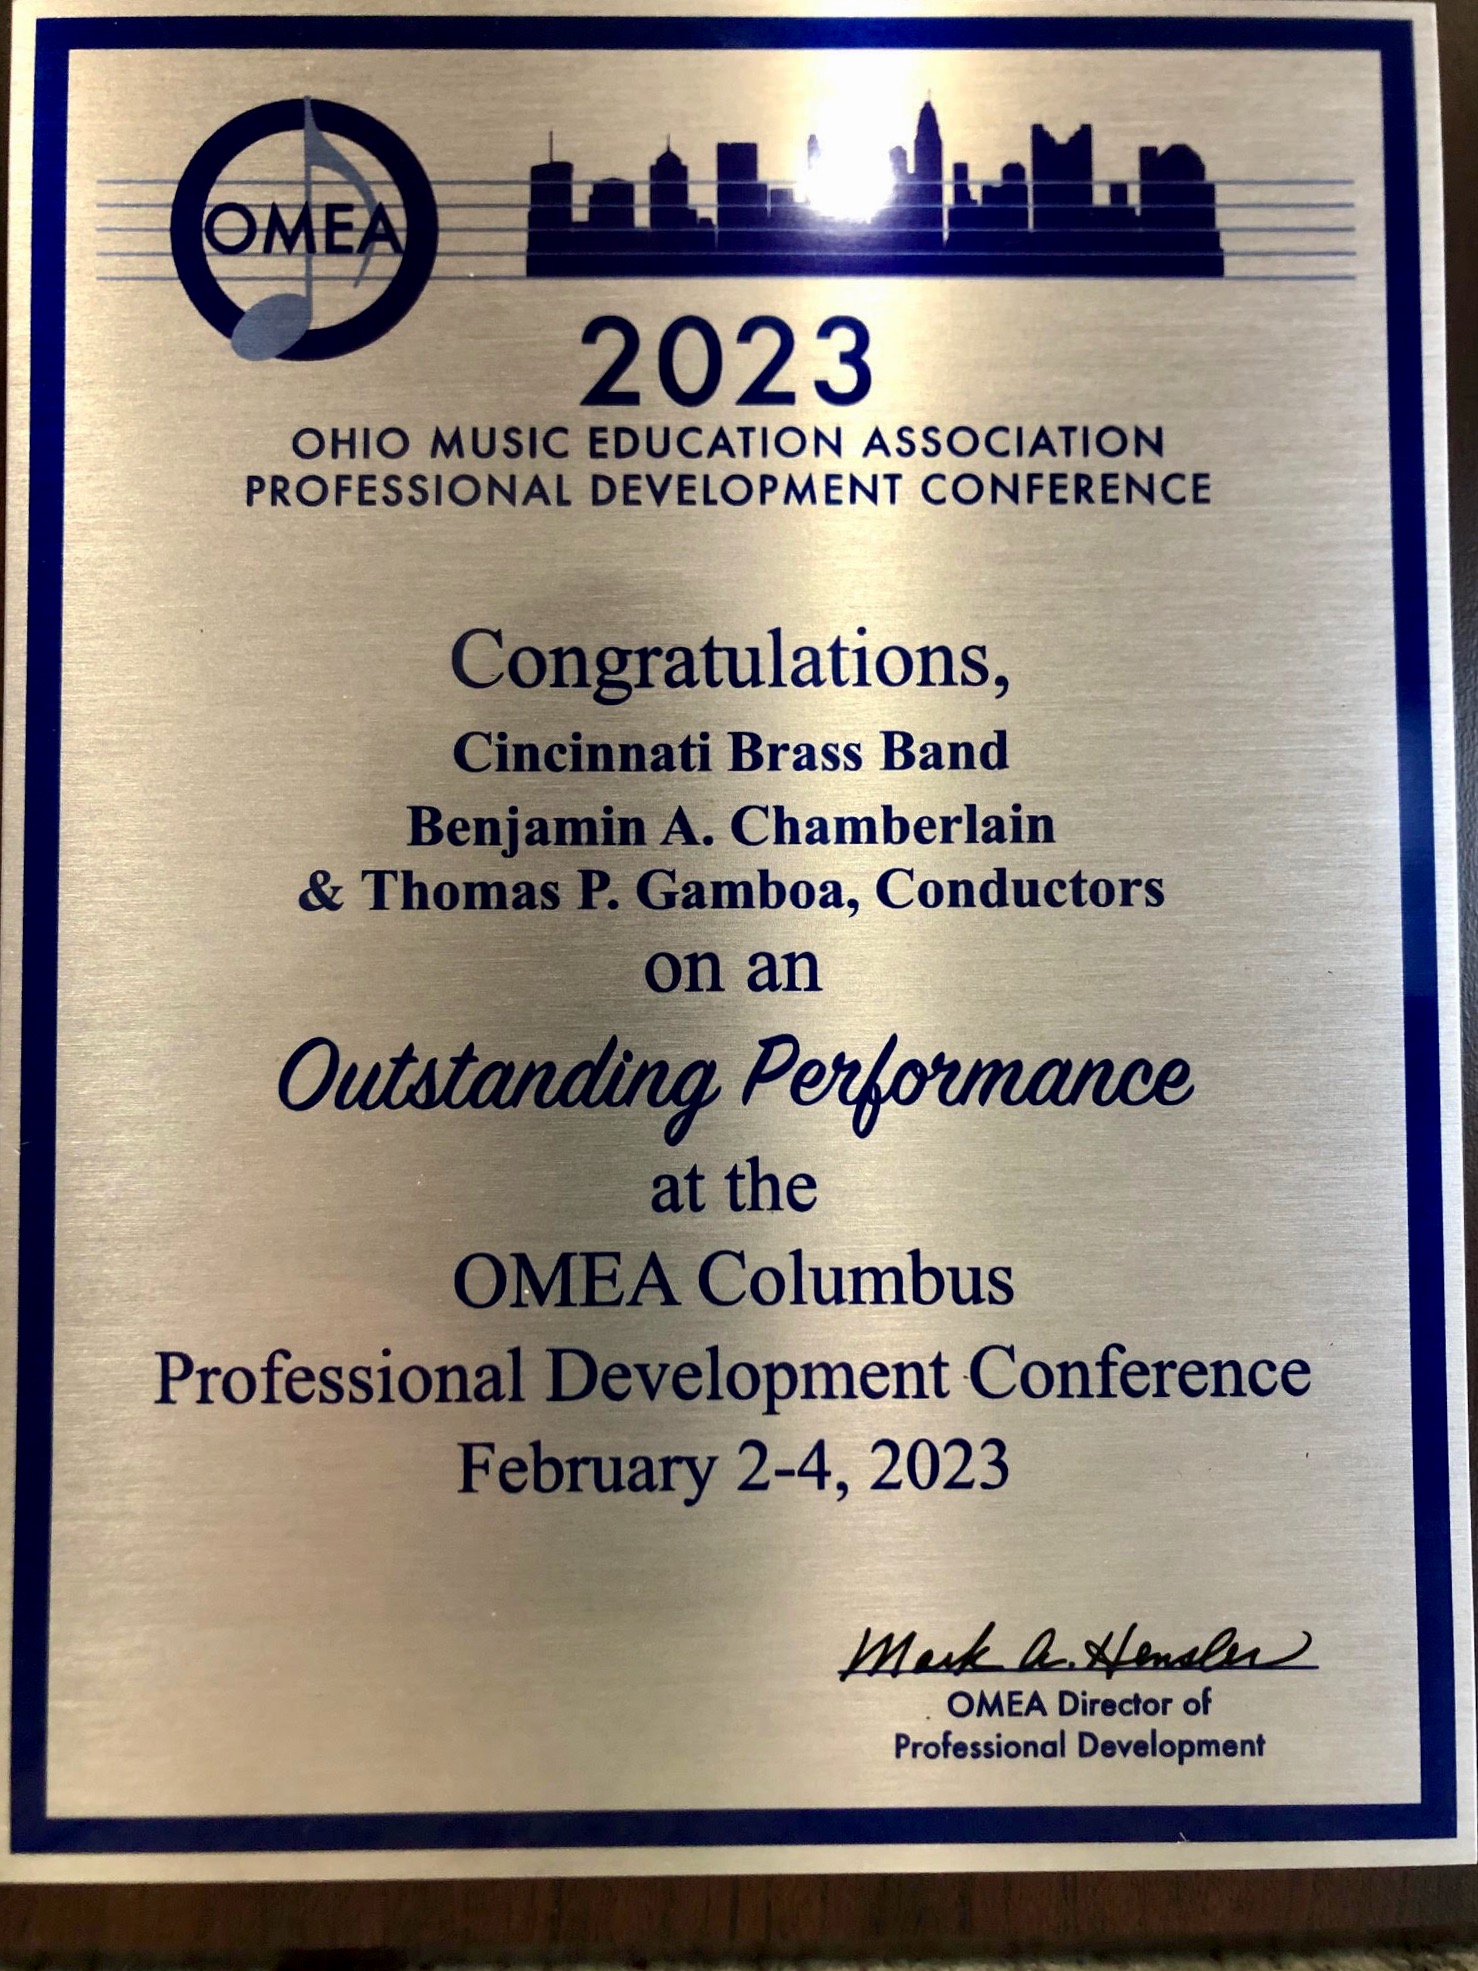 Cincinnati Brass Band performs at OMEA 2023